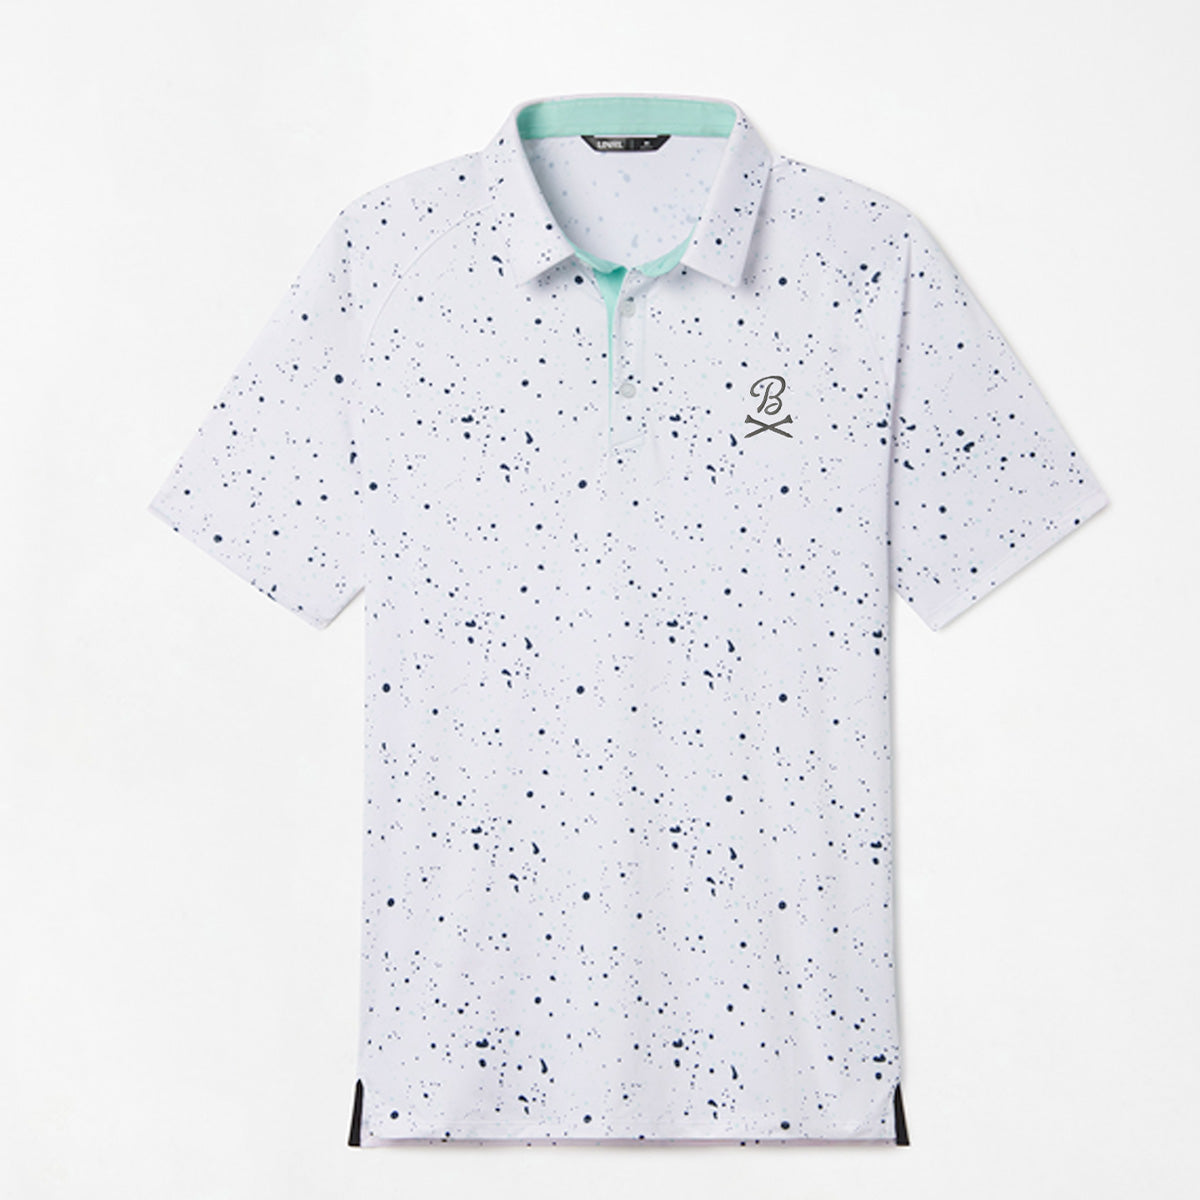 UNRL x Barstool Golf Crossed Tees Extract Polo